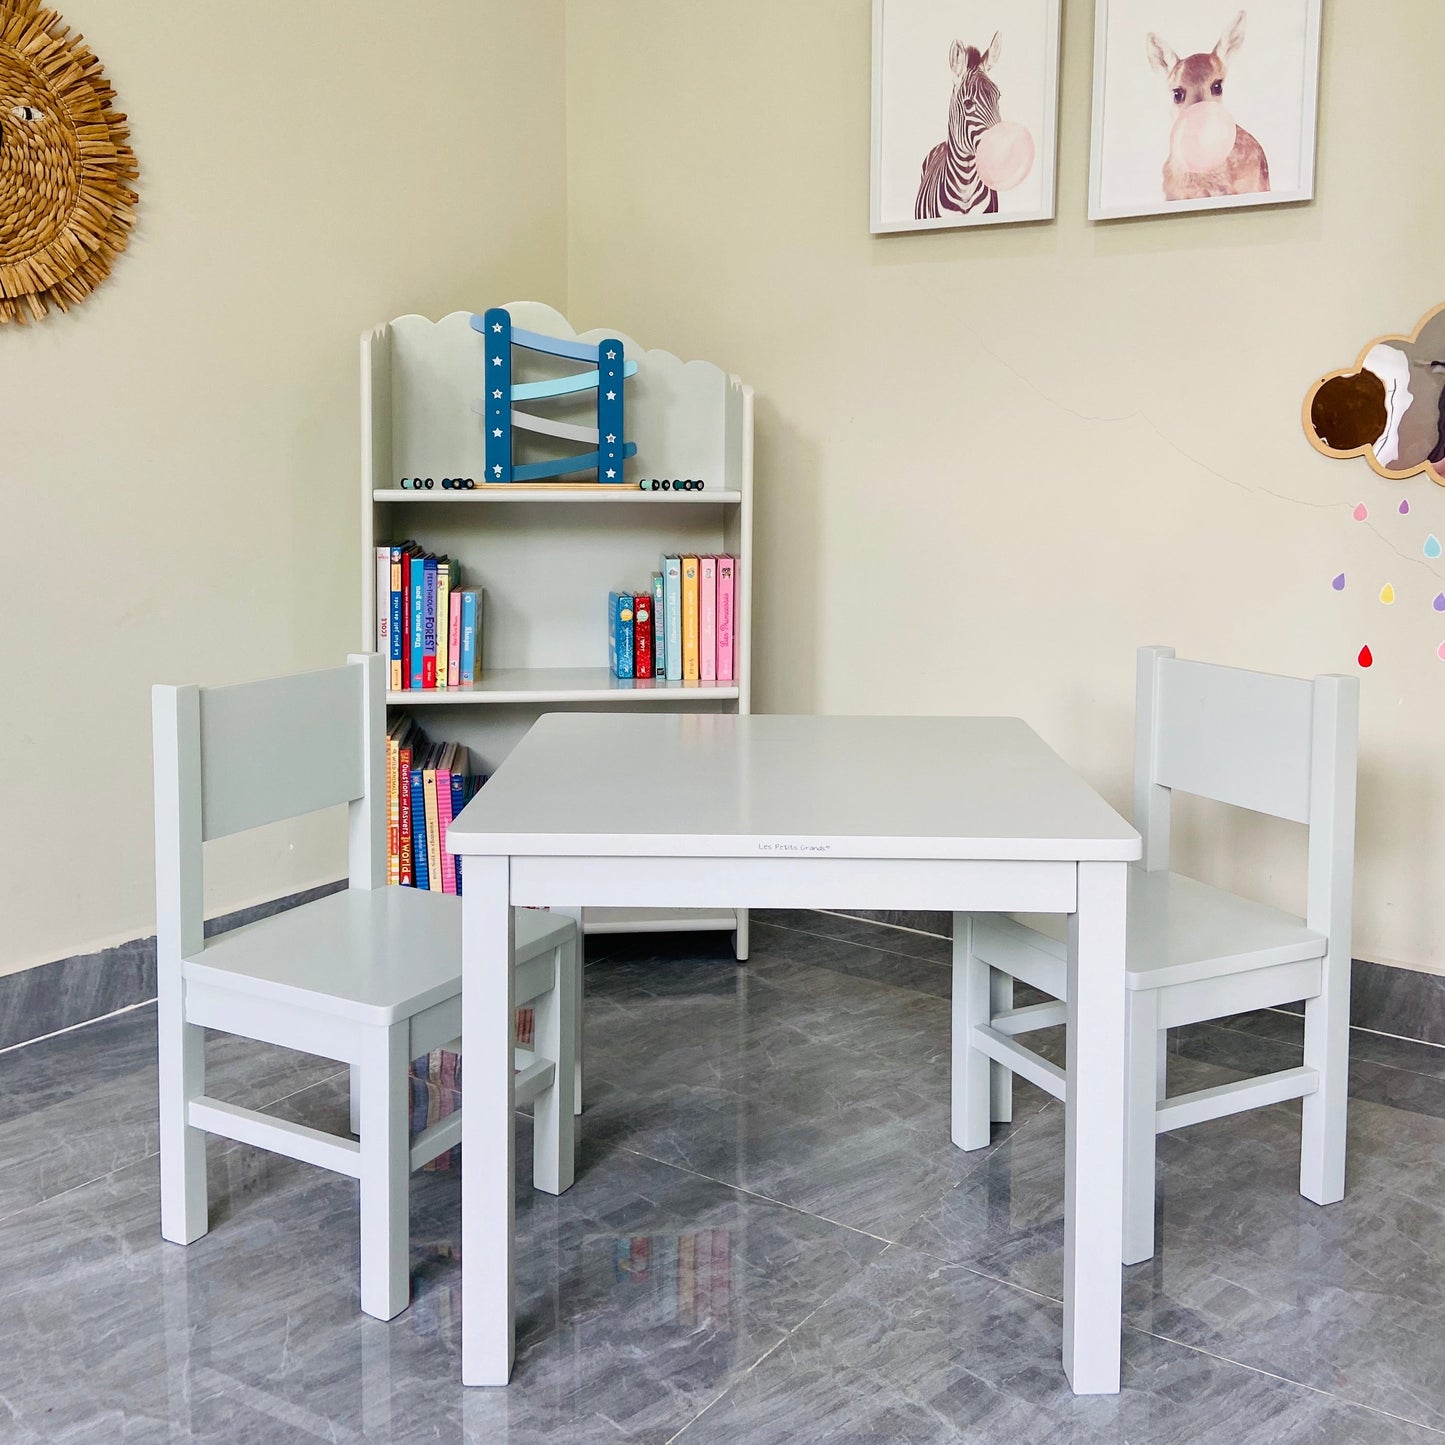 Grown-Up Set : My Everyday table and chairs